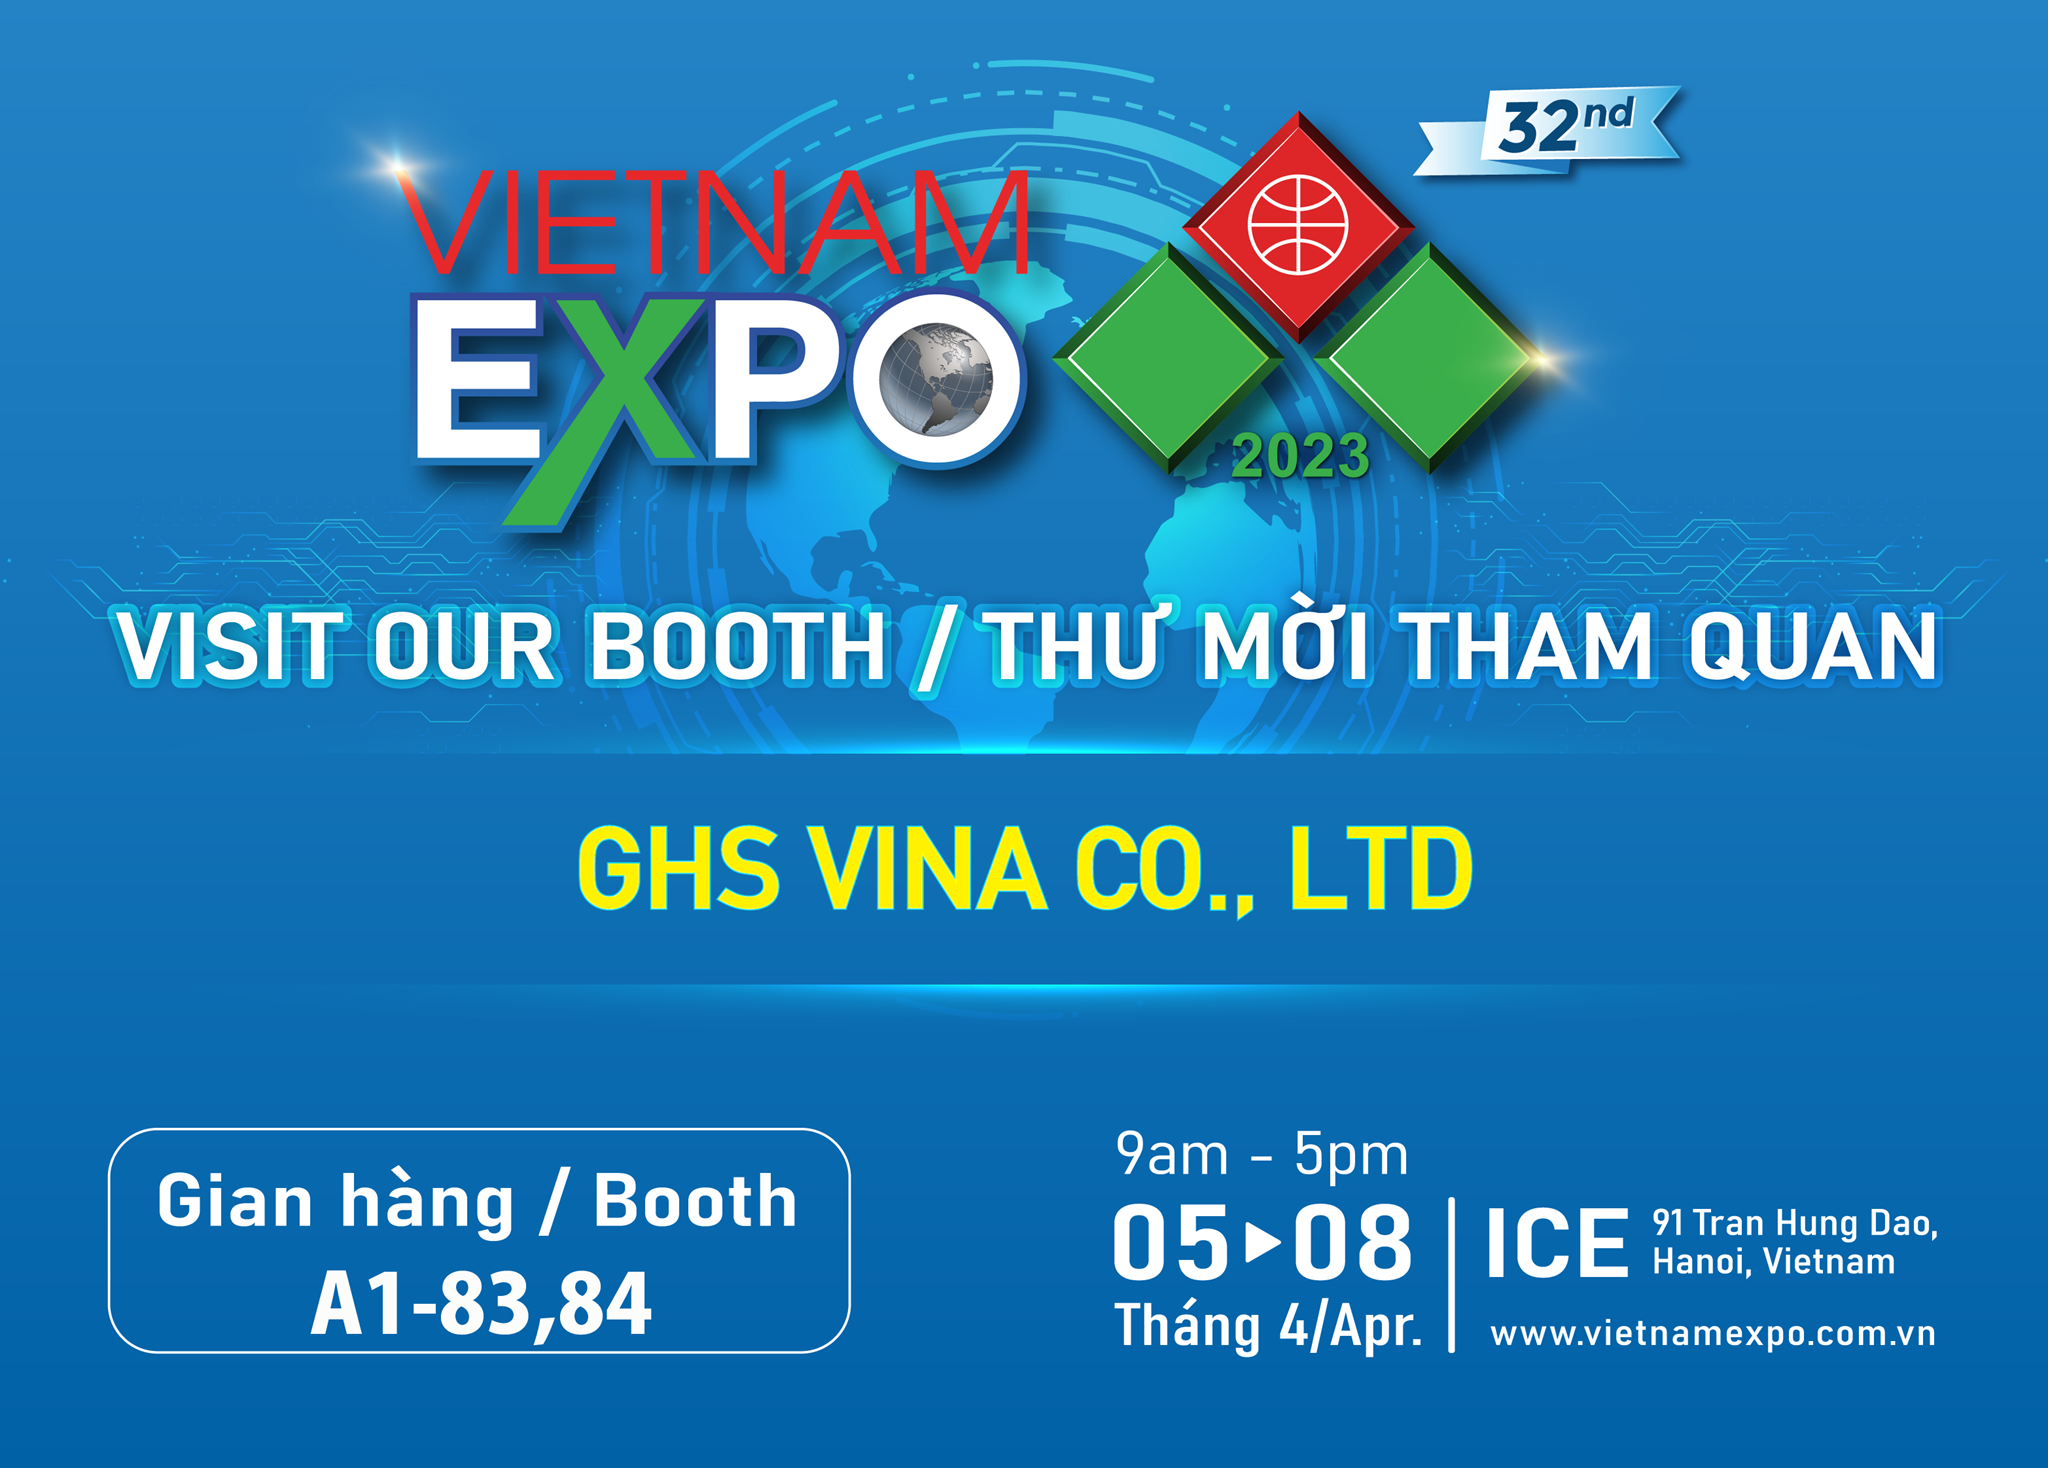 Welcome to our booth at Vietnam Expo 2023 exhibiton in Ha Noi